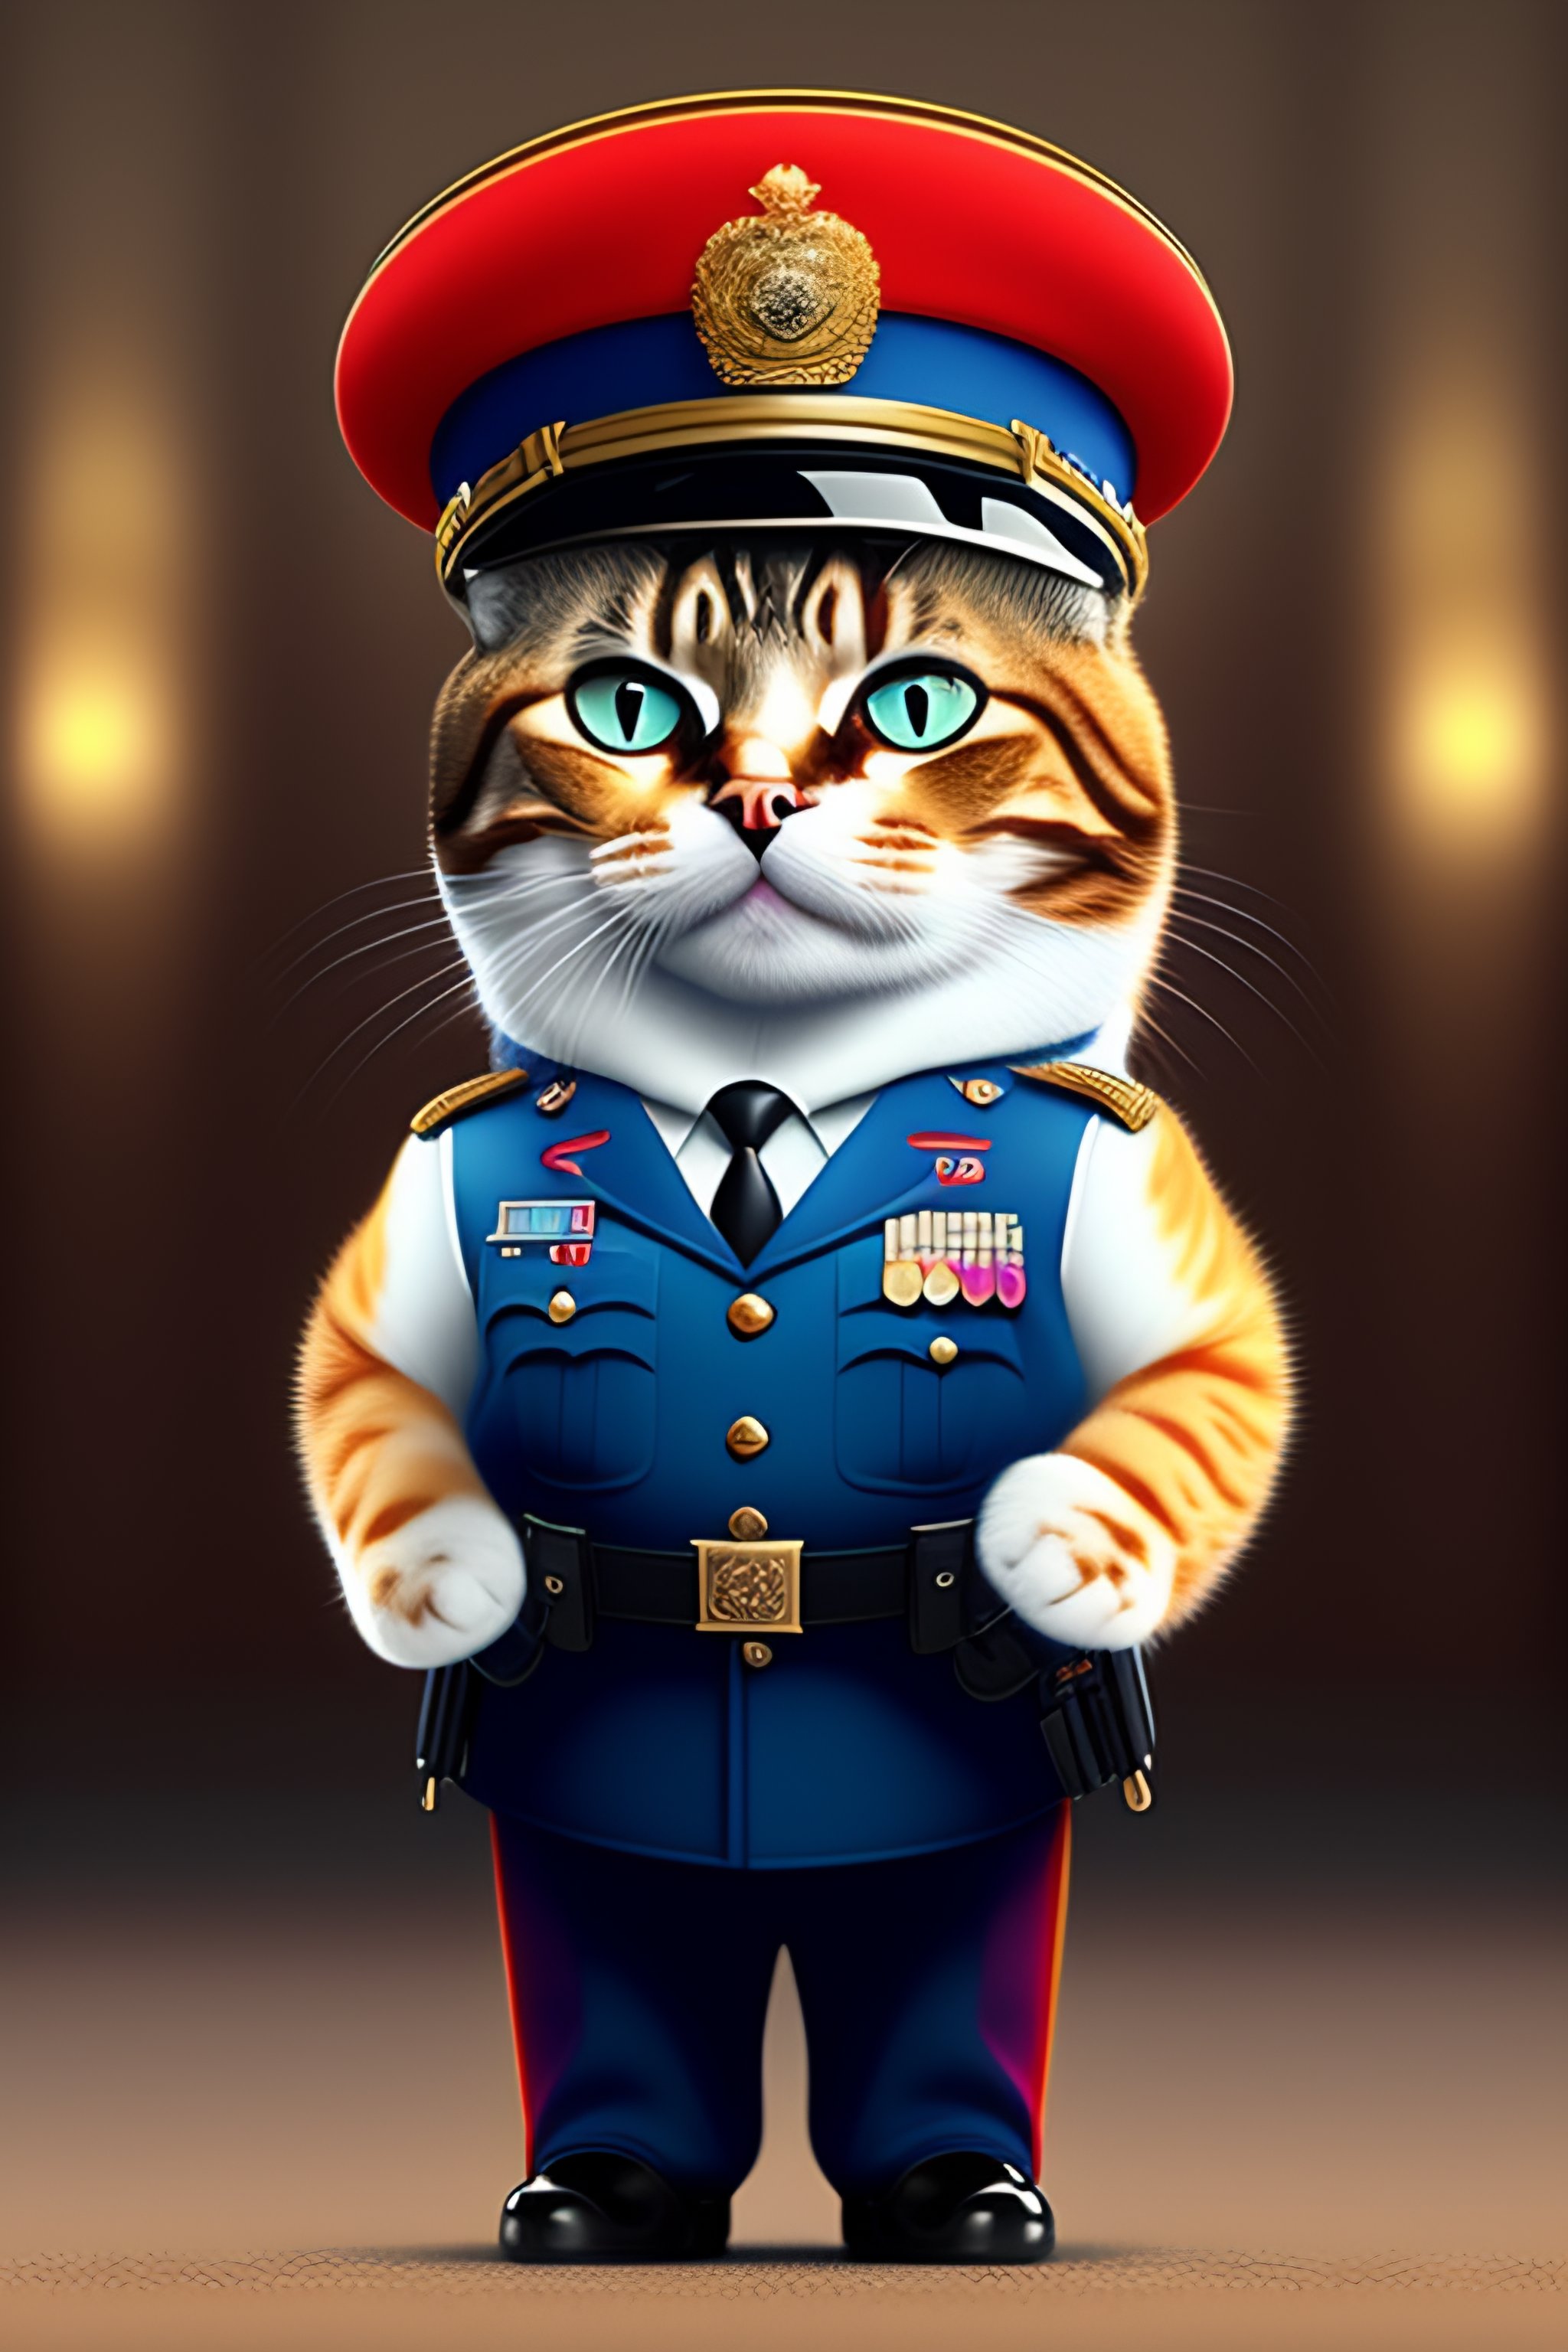 Lexica - A cat dressed as an international police officer with a